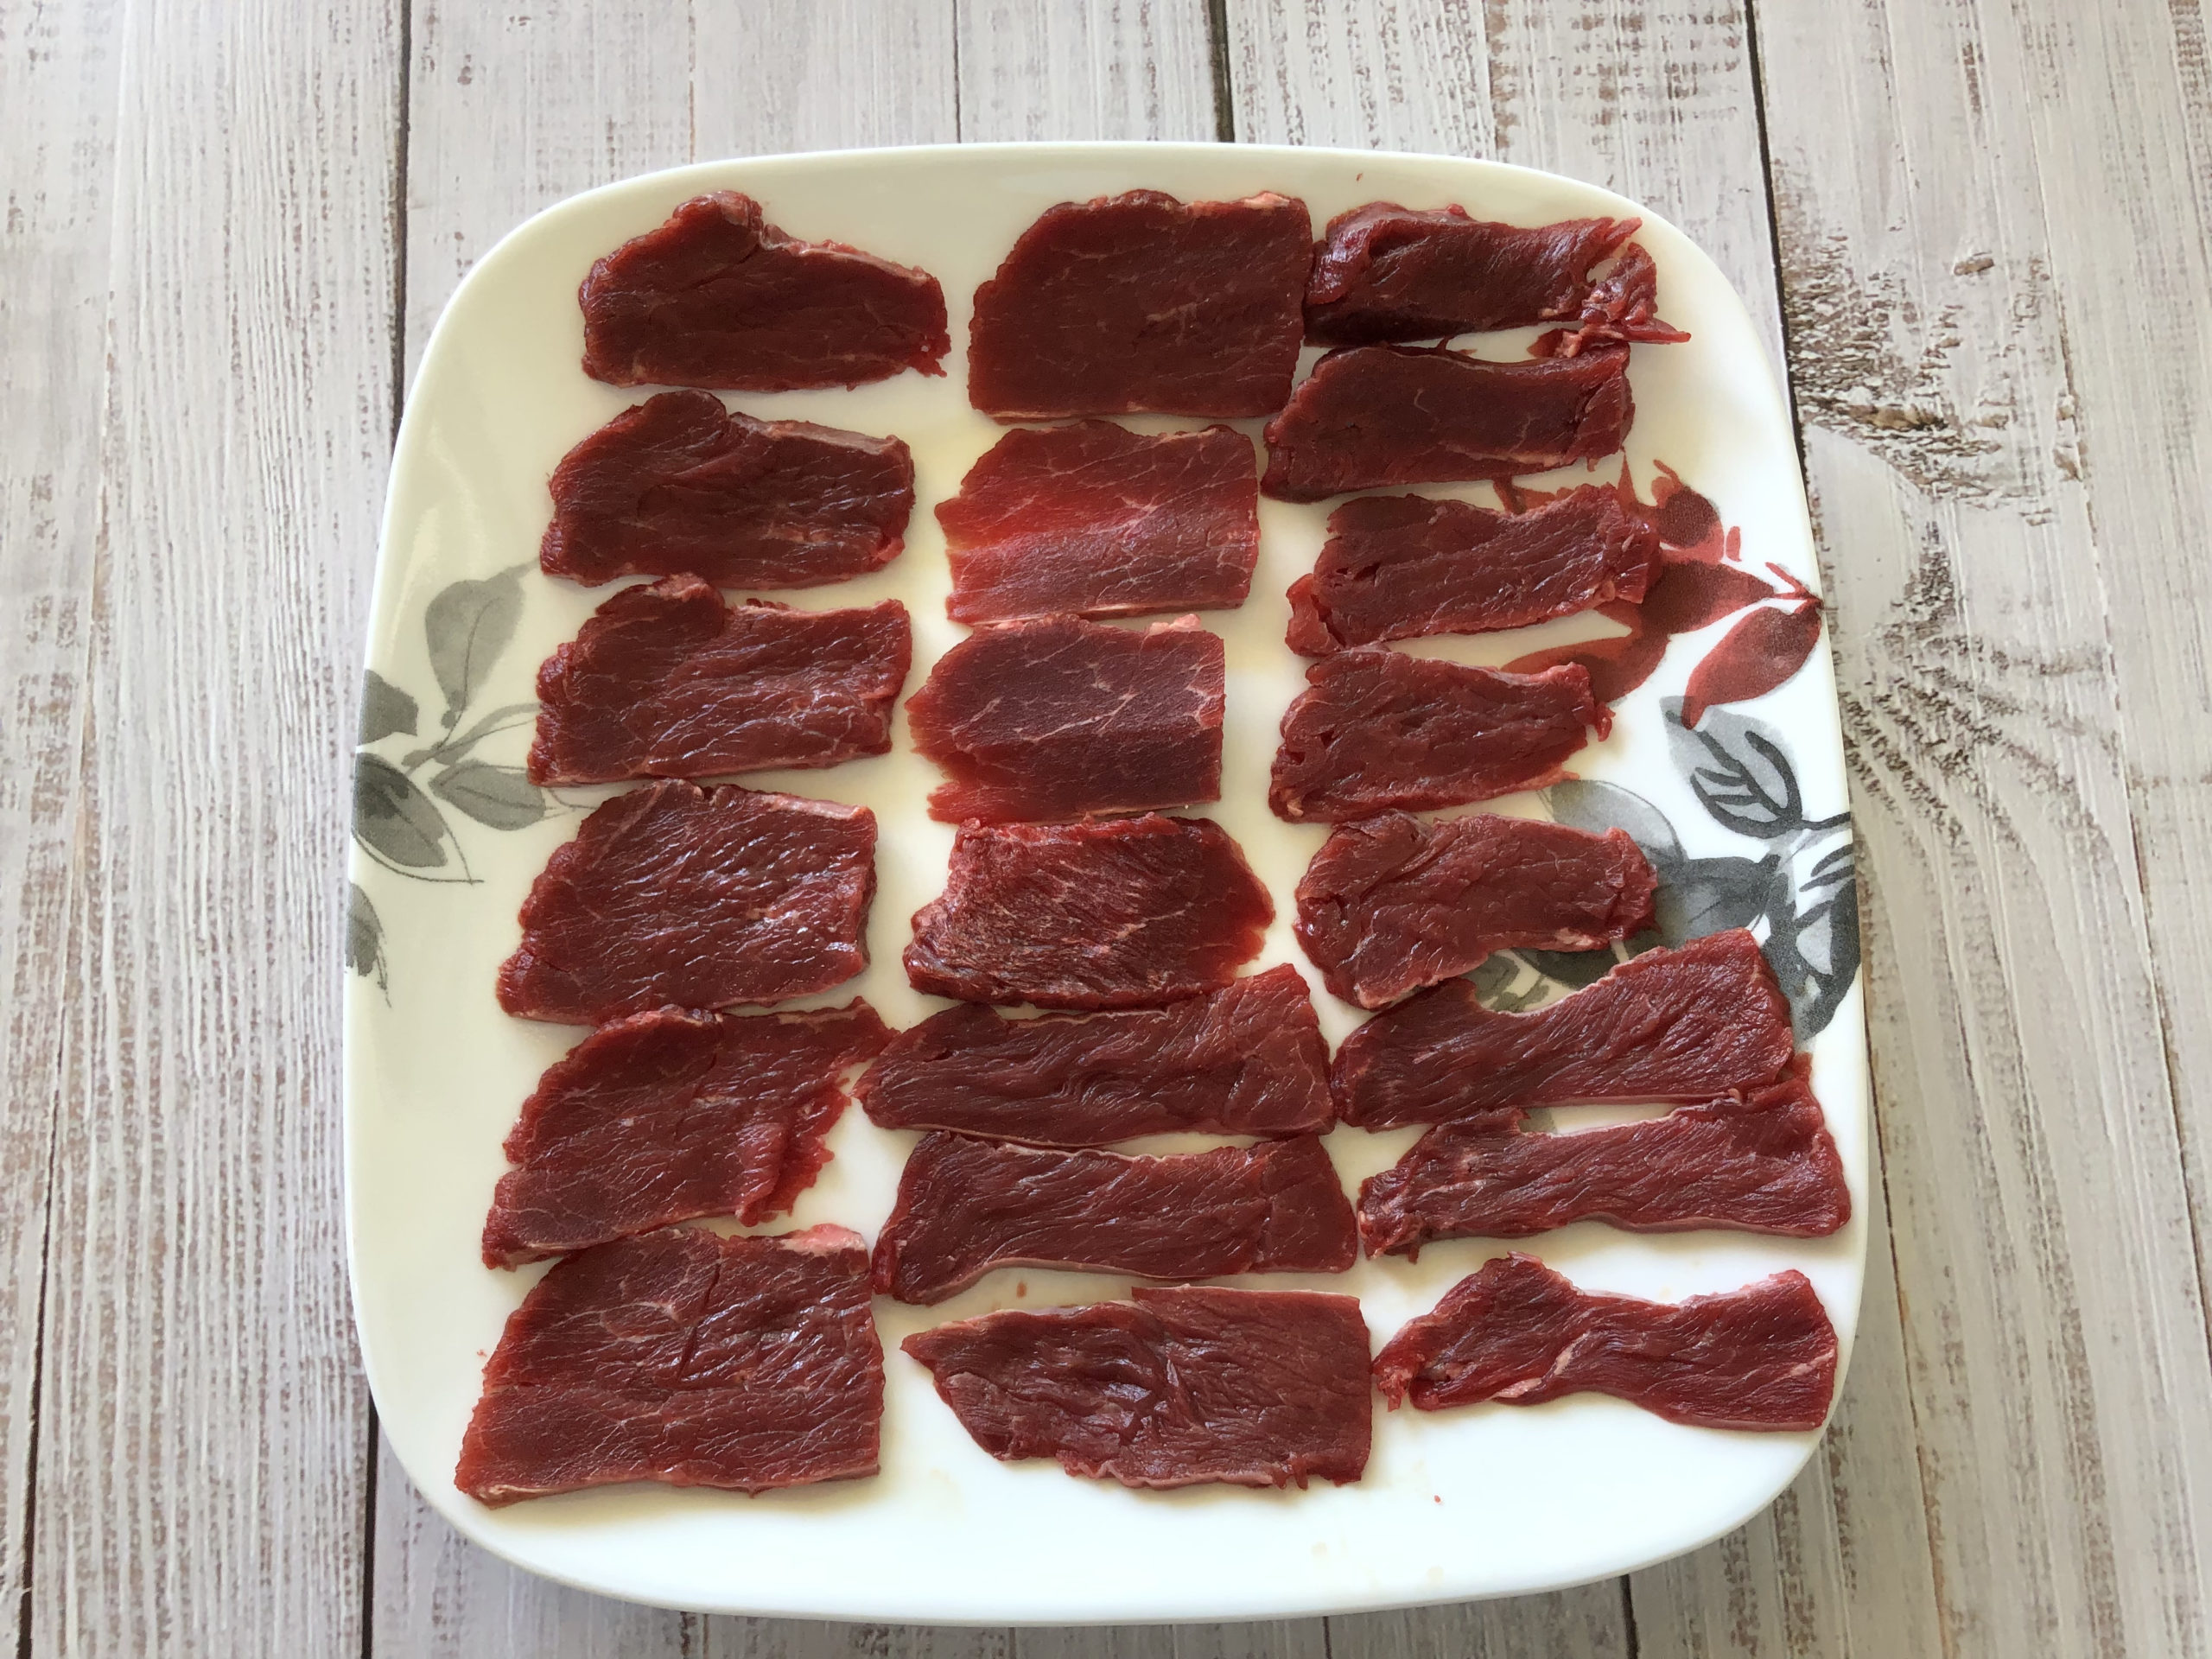 raw thin sliced bison meat on a plate